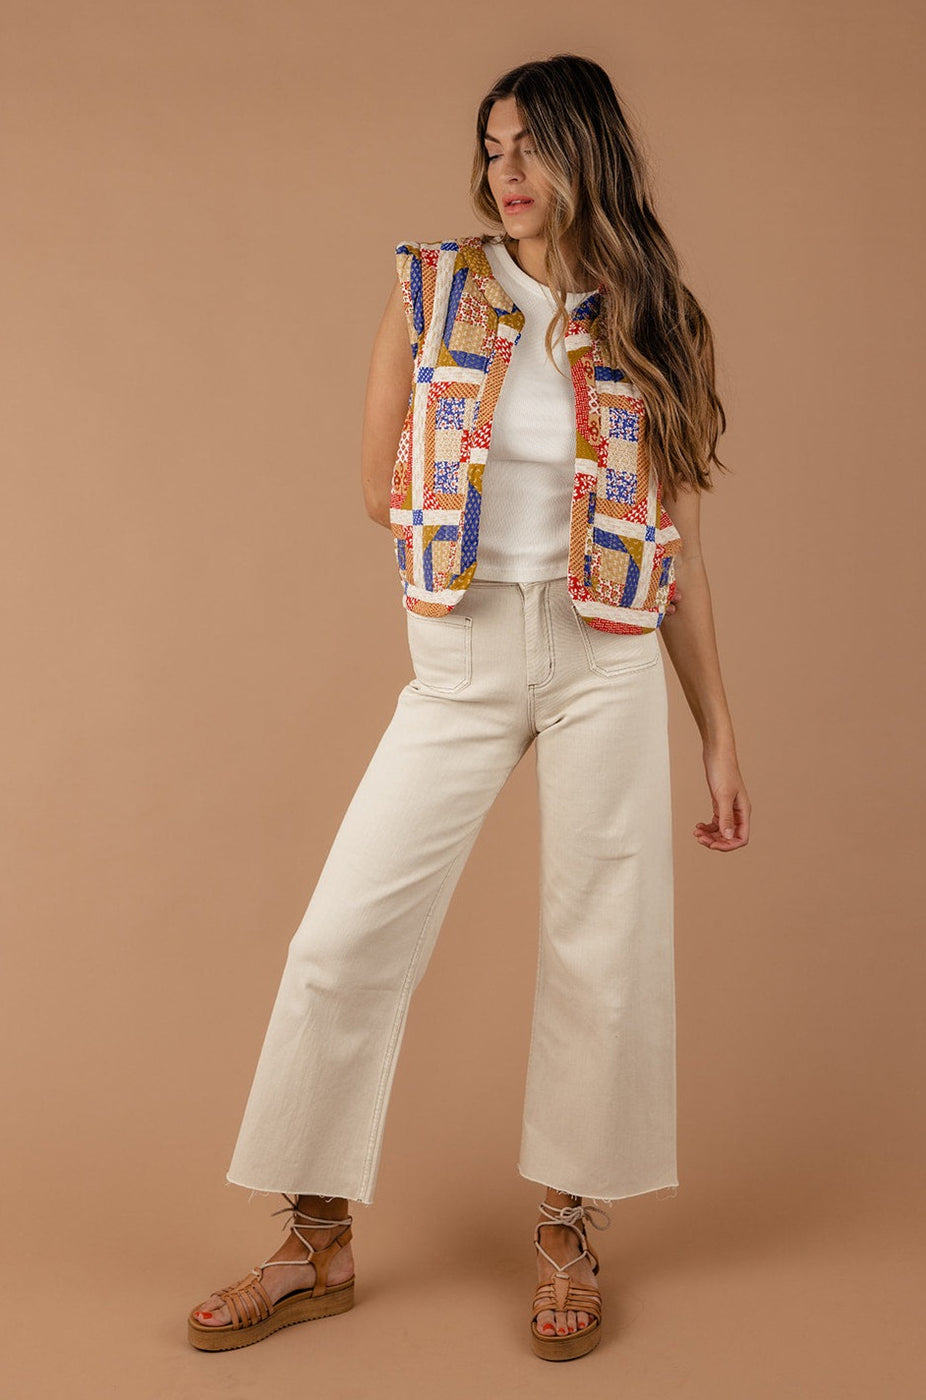 a woman in a vest and white pants